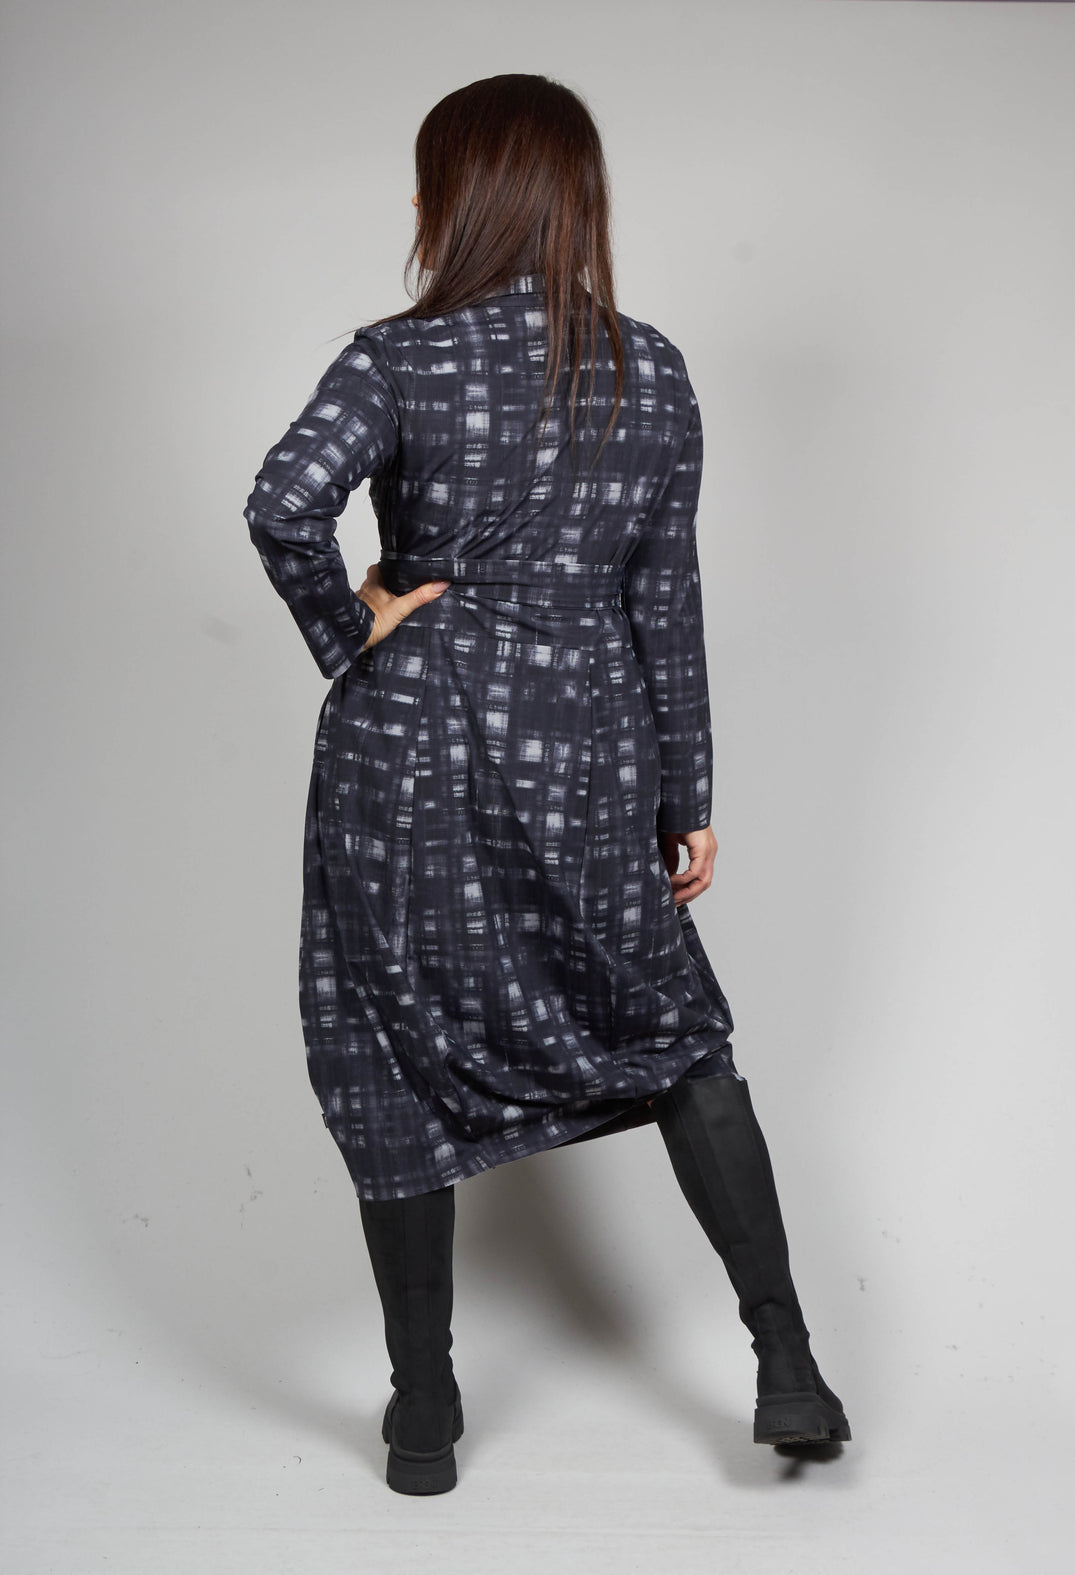 Jusan Dress in Black and Grey